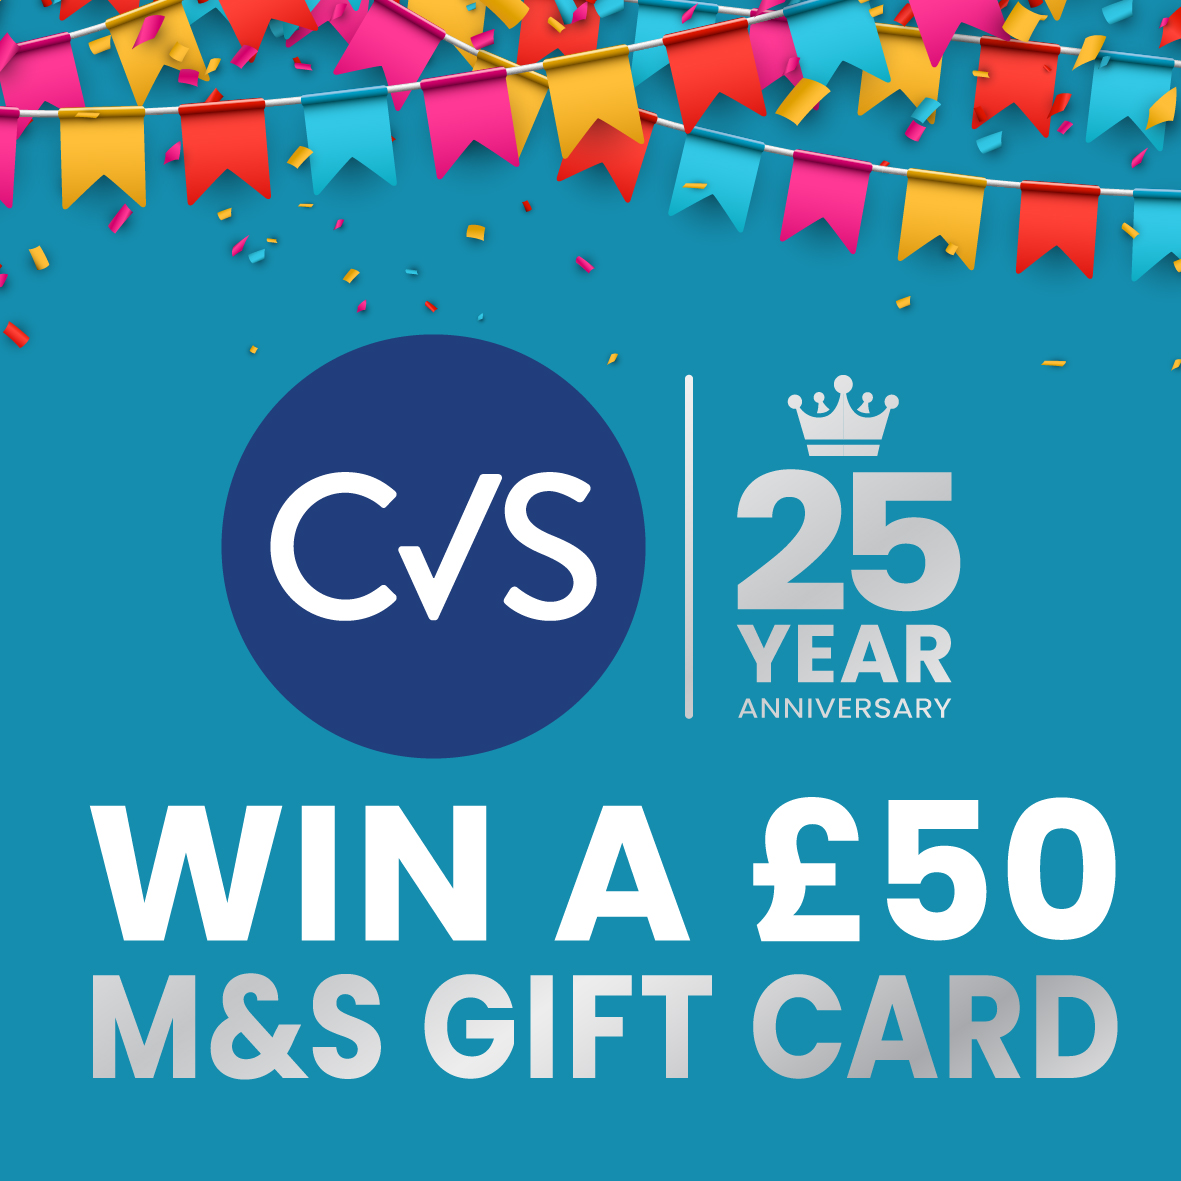 Have you entered our 25th anniversary Instagram competition⁠ with a chance to win a £50.00 Marks and Spencer voucher? ⁠🎉

instagram.com/p/C2jqriZsnqO/

Good luck 🤞

#aniversary #25thaniversary #Competition #Win #Prize #giveaway #marksandspencers #M&S #CarLeasing #PoorCredit